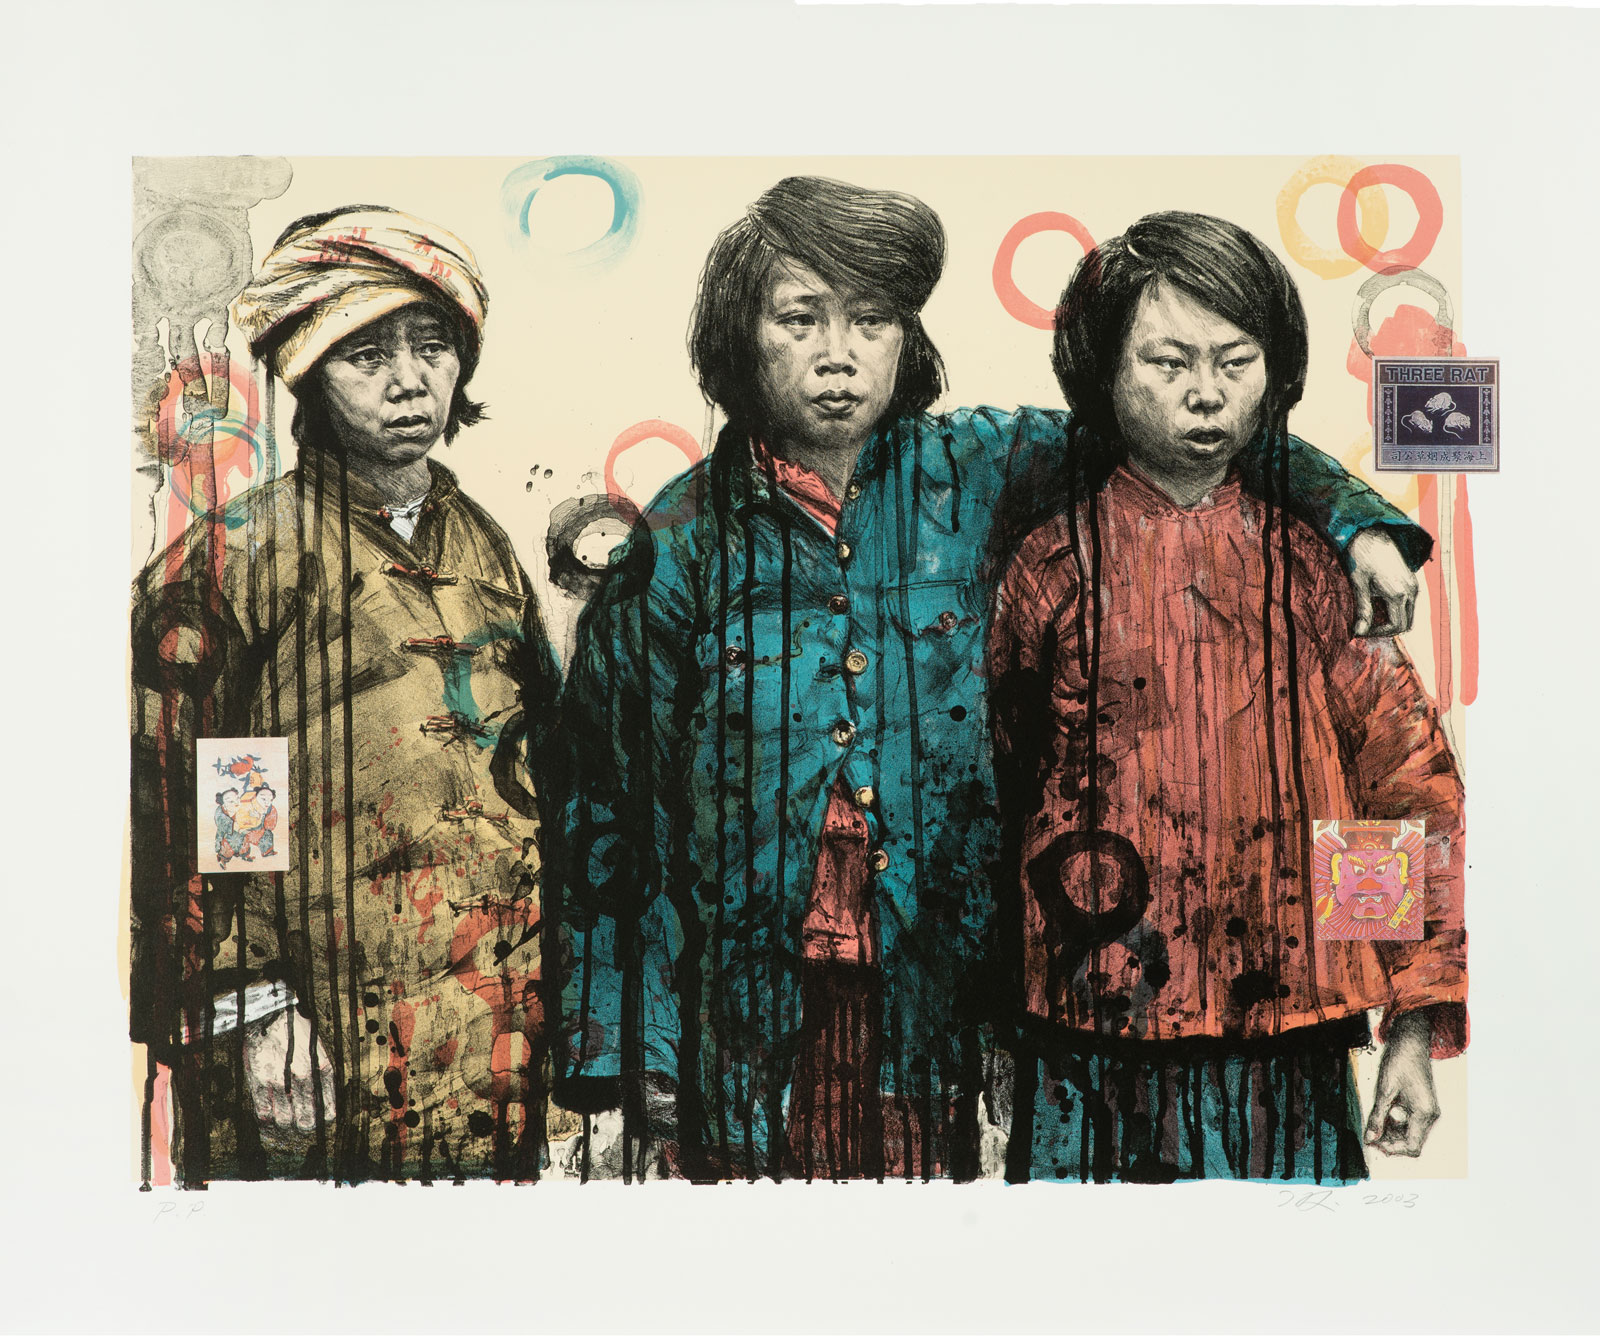 Hung Liu, born 1948 Changchun, People’s Republic, China; lives Oakland, California, Sisters in Arms I, 2003, 6 color lithograph with chine collé of chinese designs, Albuquerque Museum, gift of Marjorie Devon, PC2014.59.1